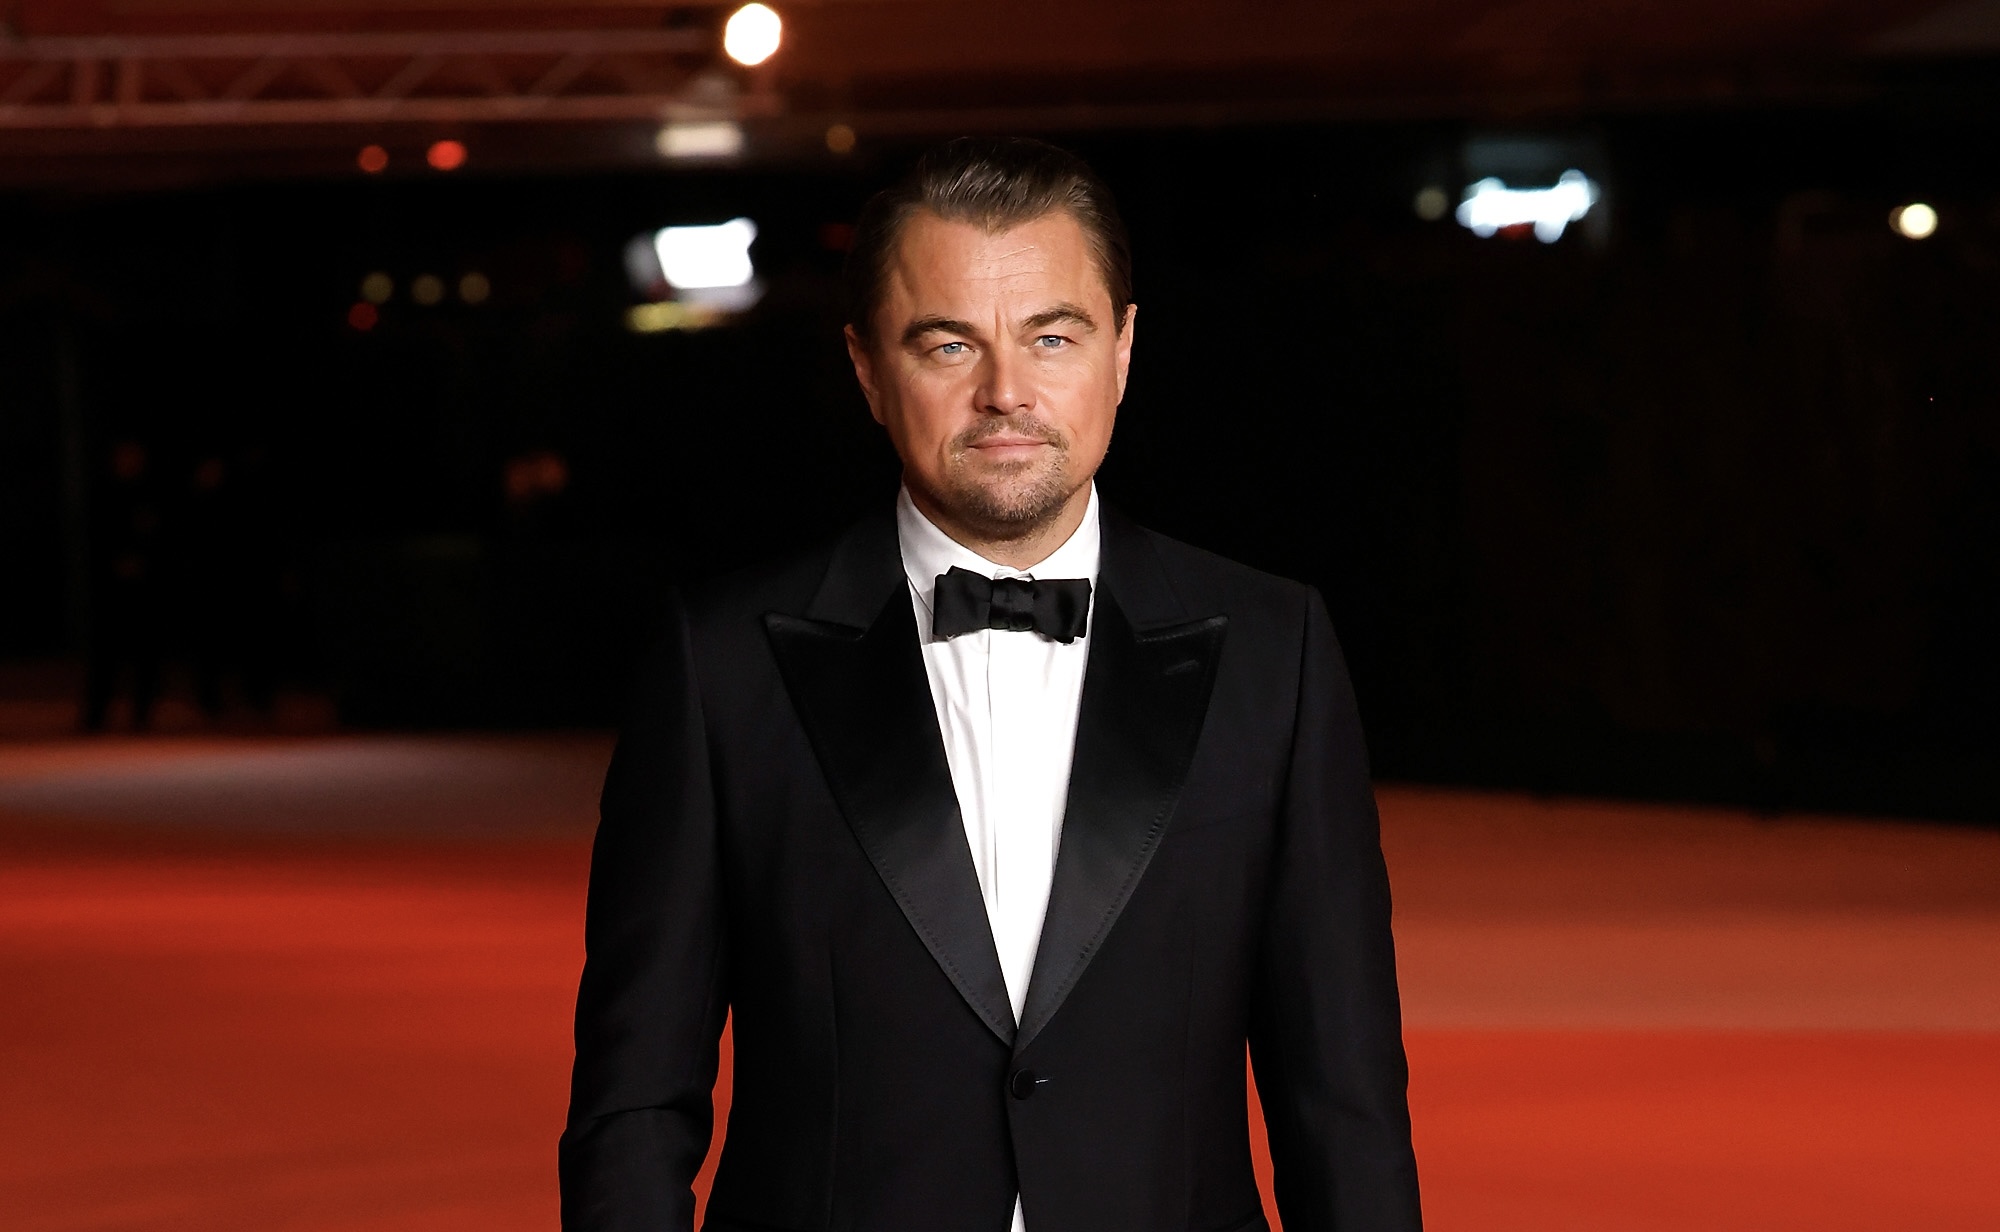 Leonardo DiCaprio in a classic tuxedo at the Academy Museum Gala in Los Angeles, exemplifying traditional Hollywood elegance.